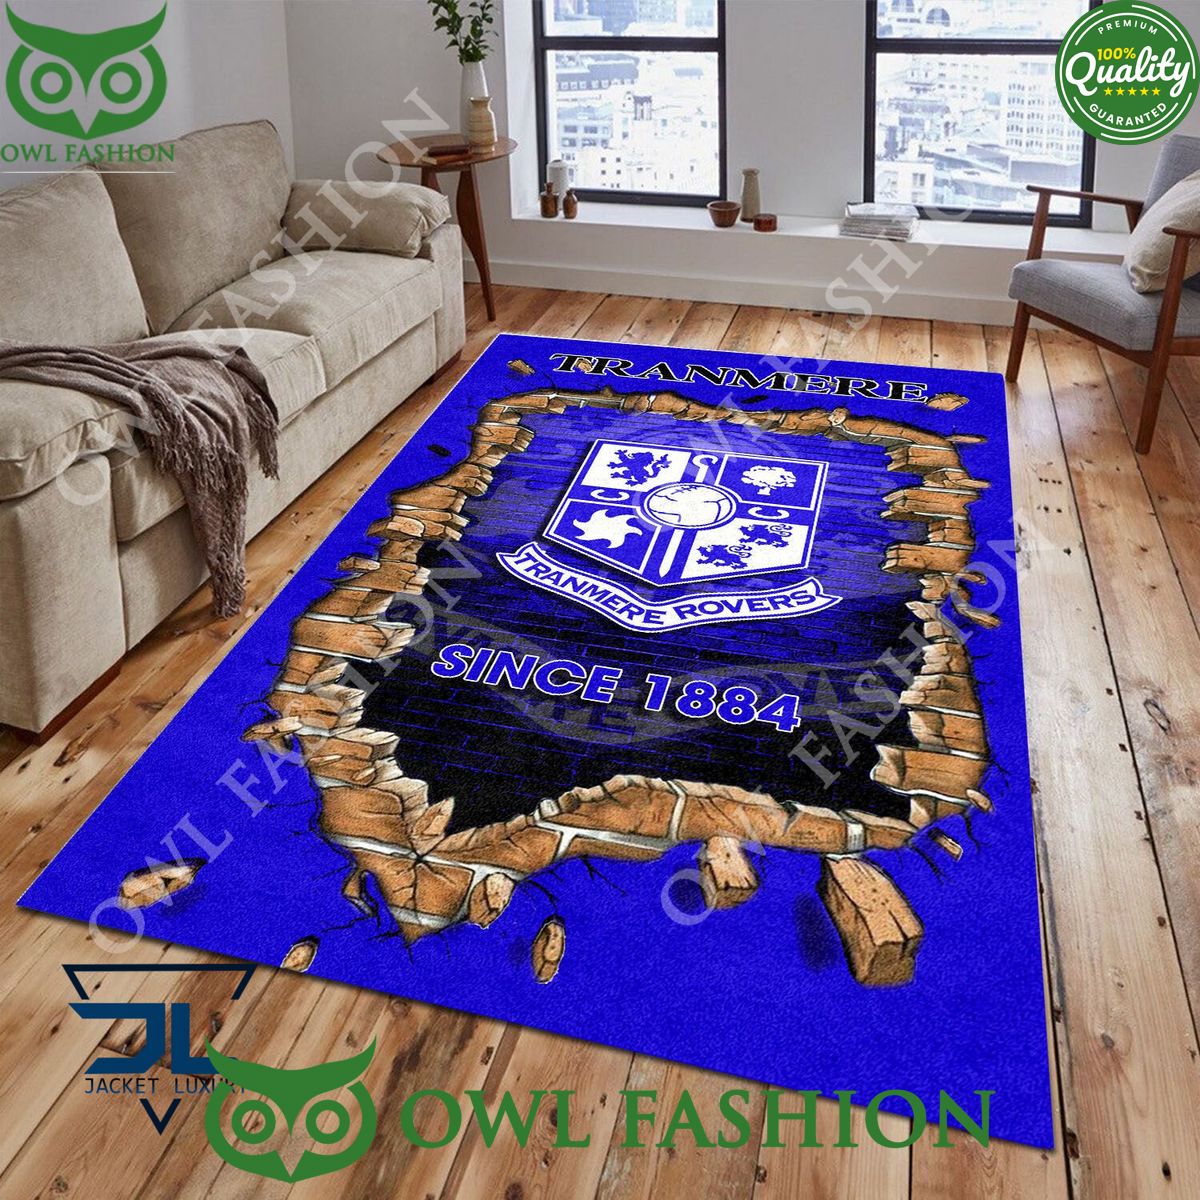 Tranmere Rovers 1863 League Two Living Room Rug Carpet